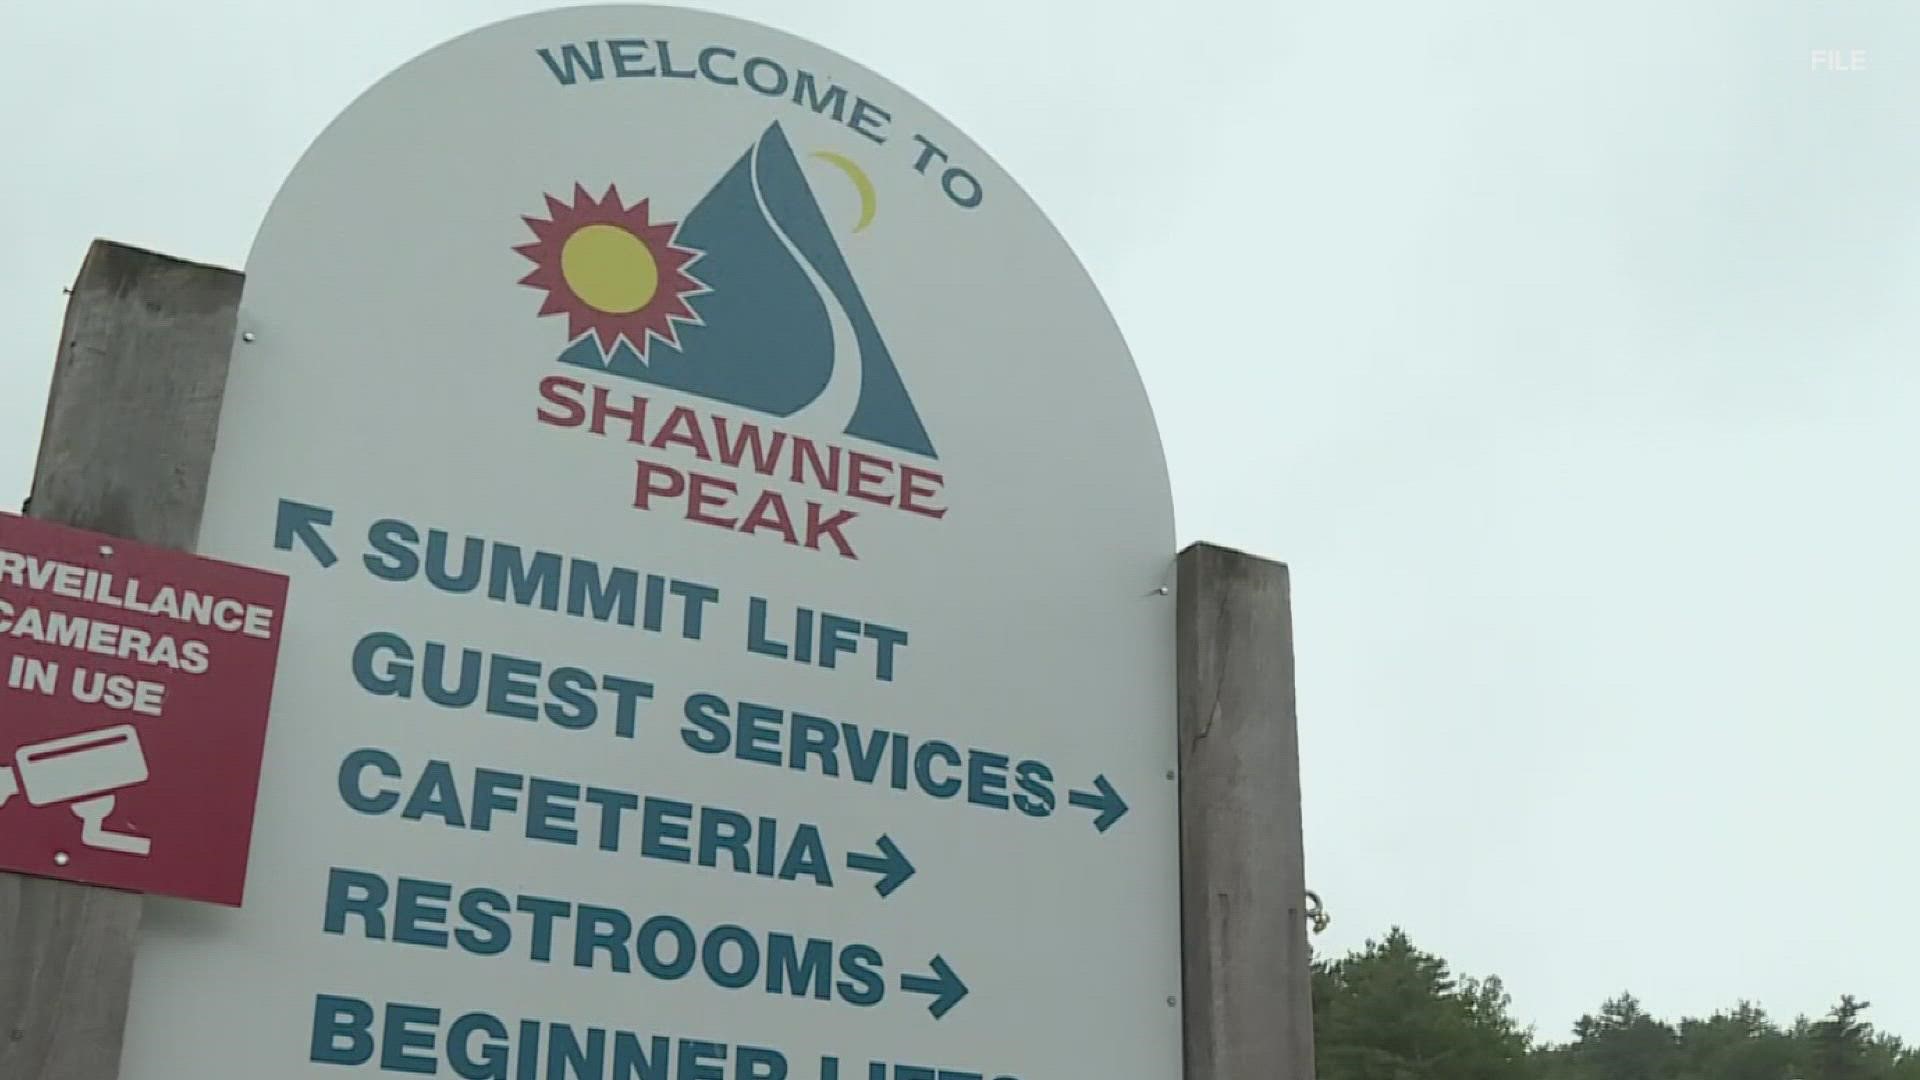 Shawnee Peak is Boyne's fourth resort in New England, joining Sugarloaf and Sunday River in Maine and Loon Mountain Resort in New Hampshire.